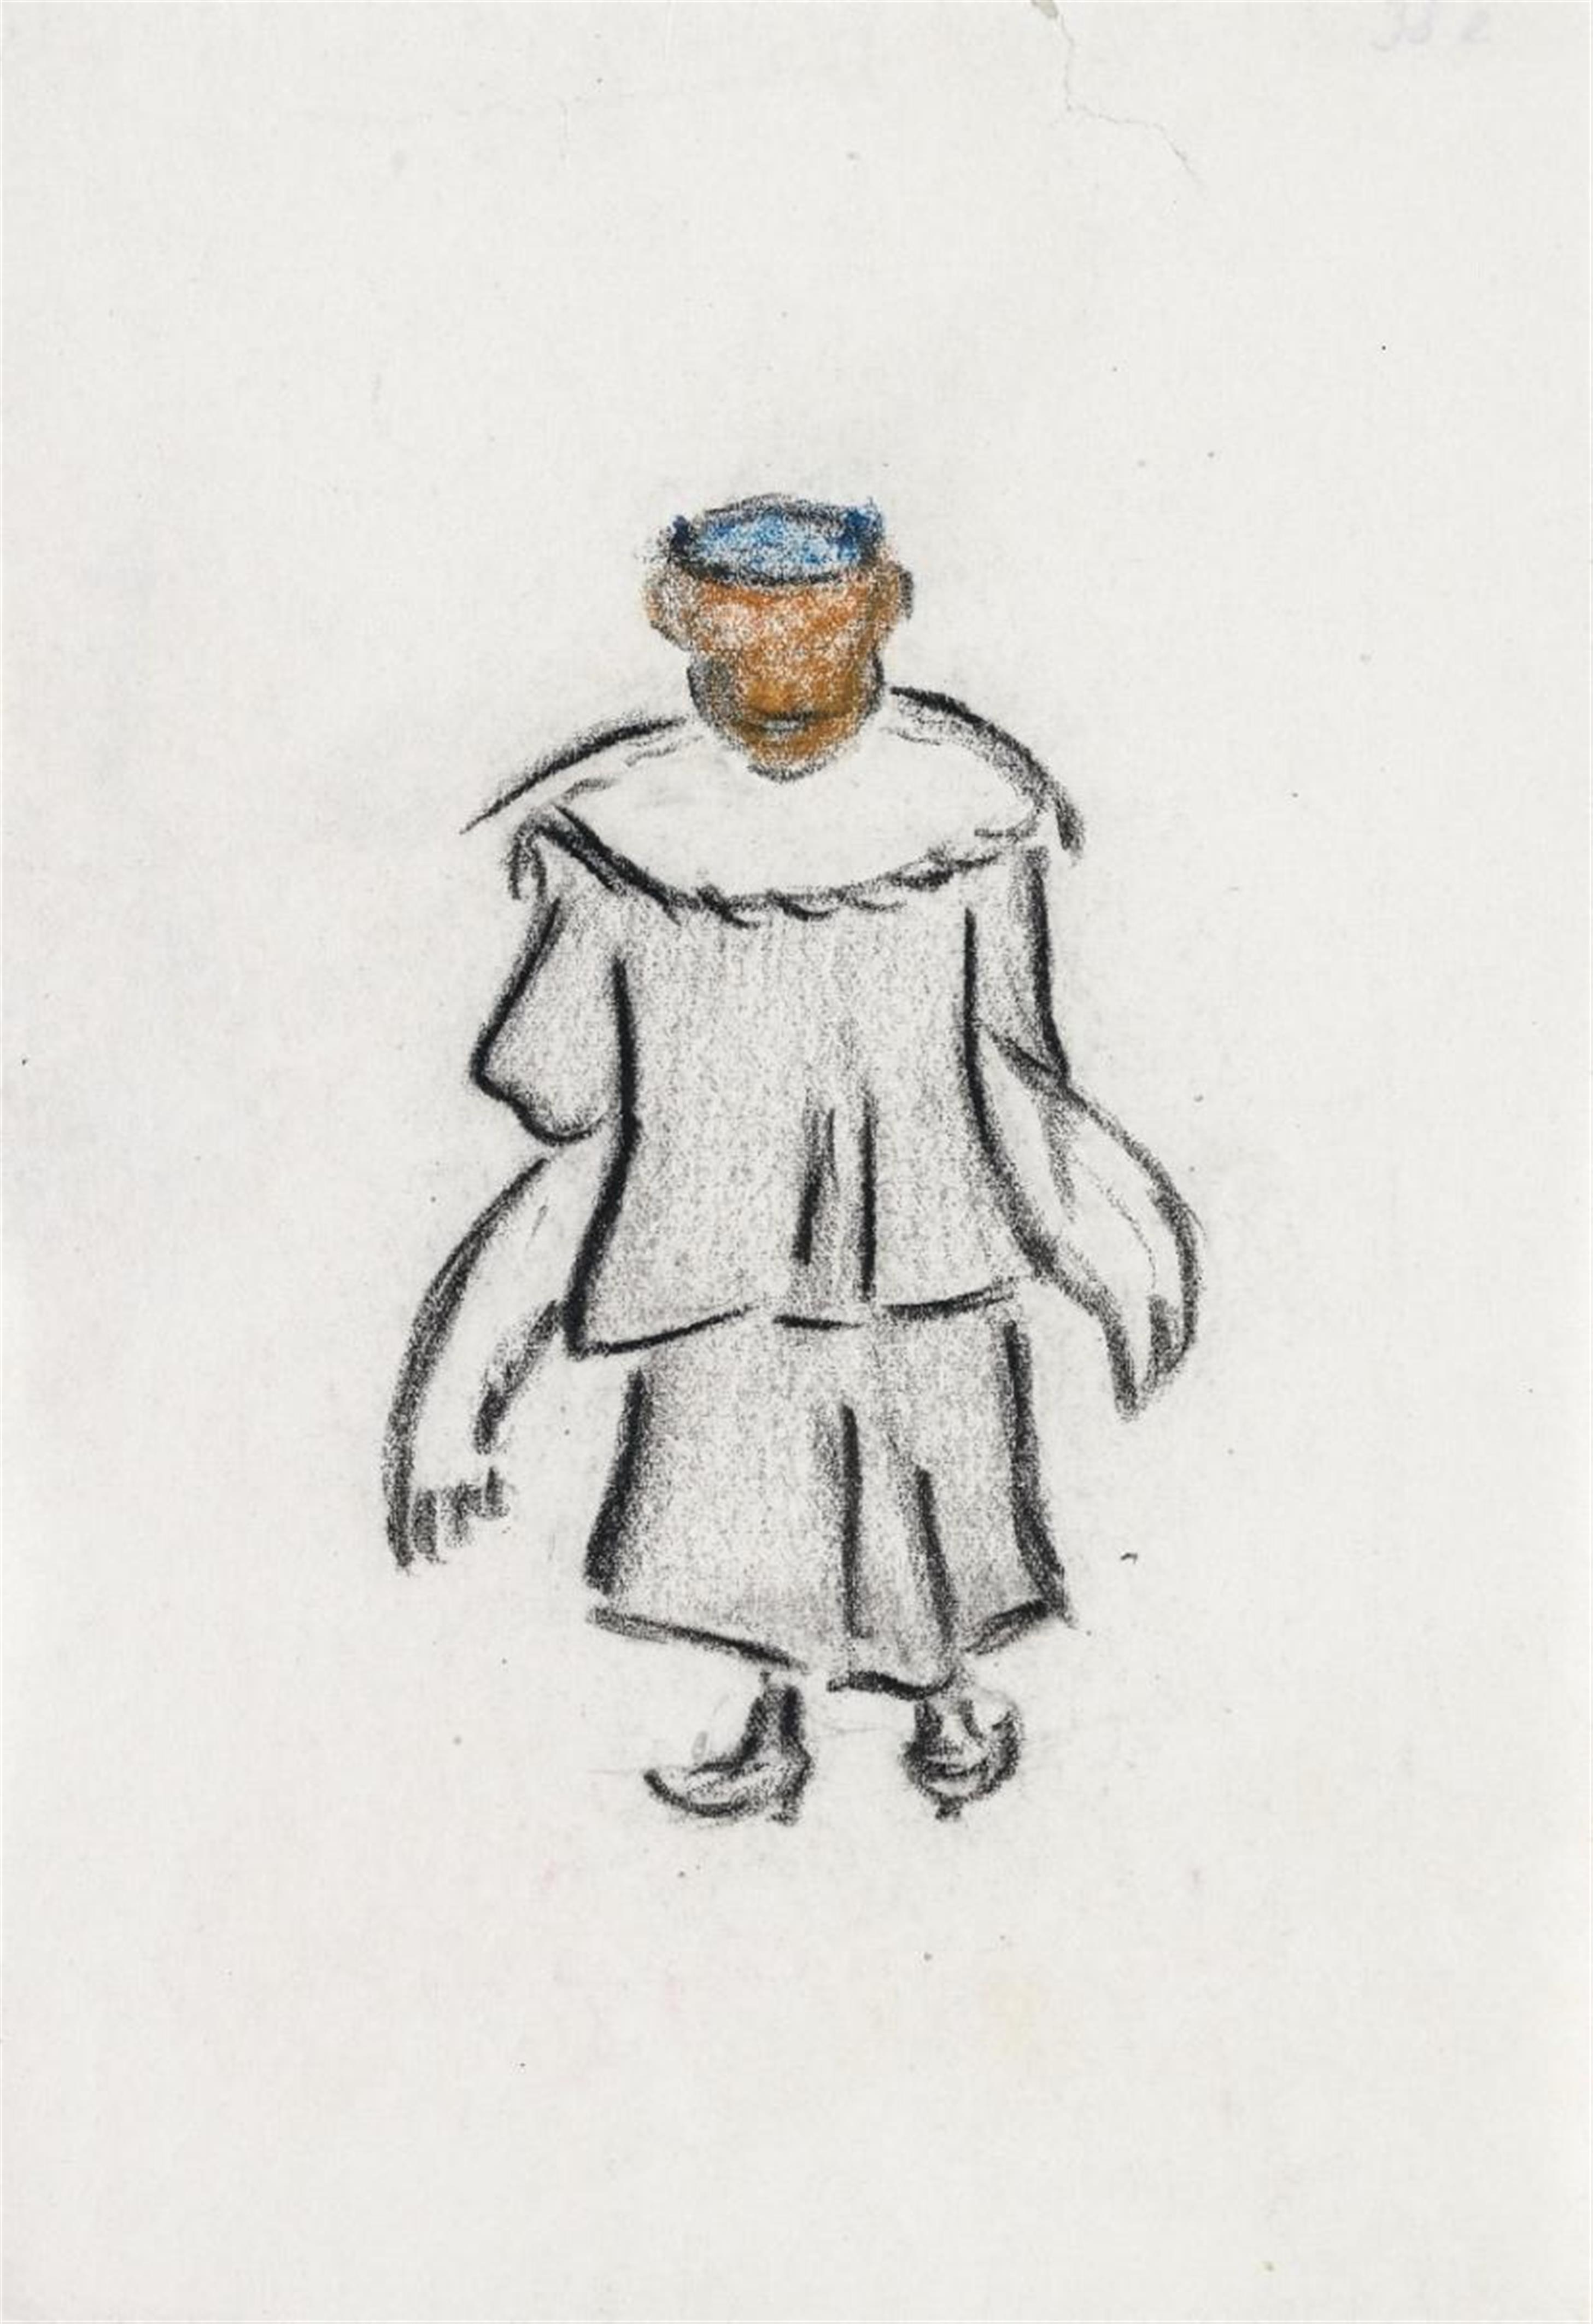 Heinrich Zille - Two drawings: Frau im Fransentuch mit weisser Schürze. Dame mit Hut und Stola - Rückenfigur (Woman with shawl and white apron. Lady with hat and stole - back figure) - image-2